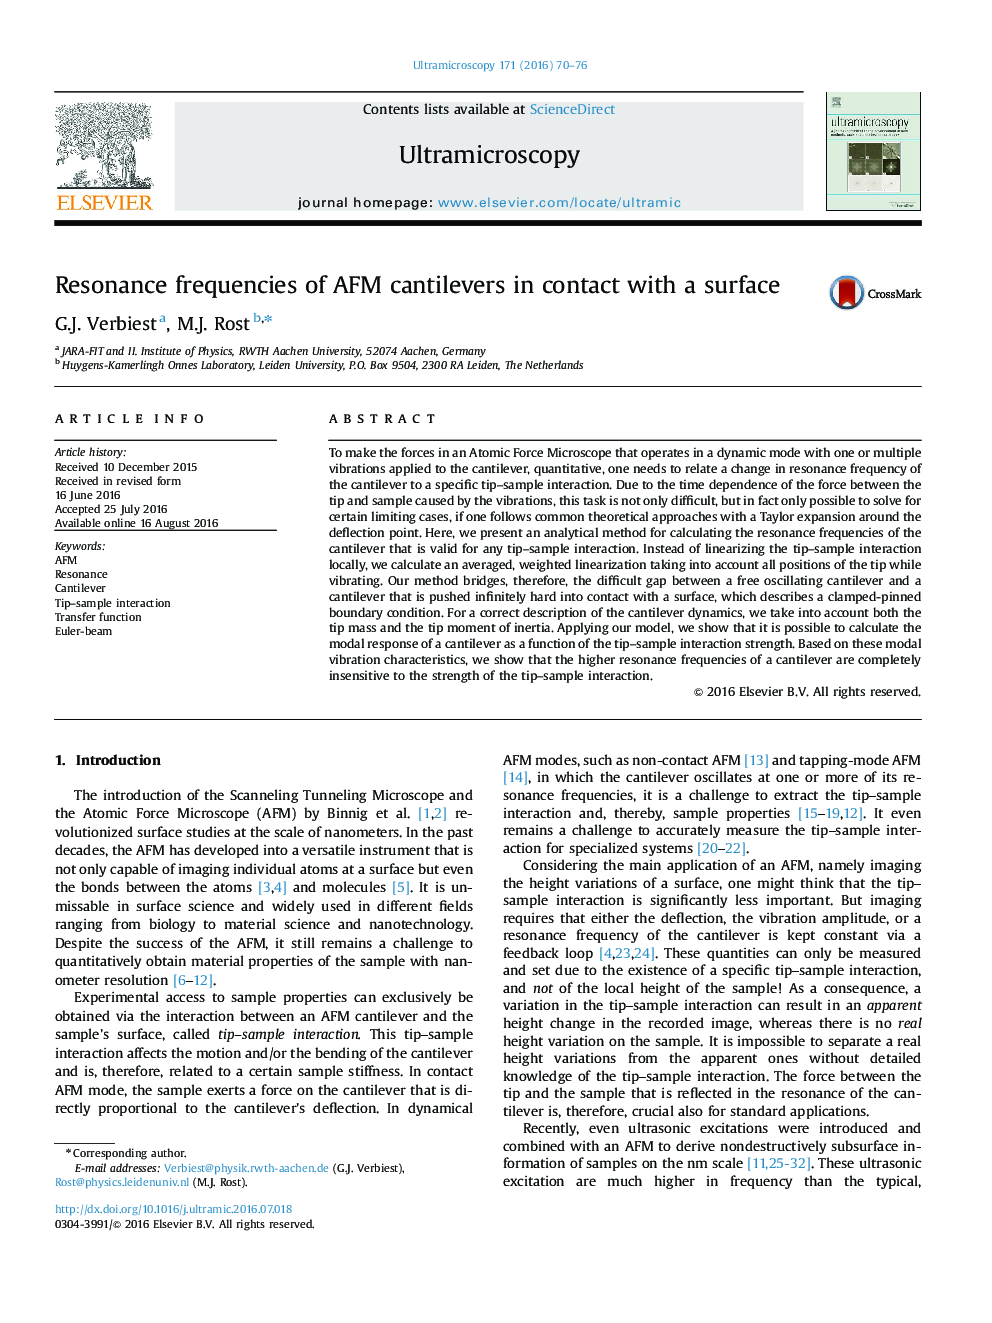 Resonance frequencies of AFM cantilevers in contact with a surface